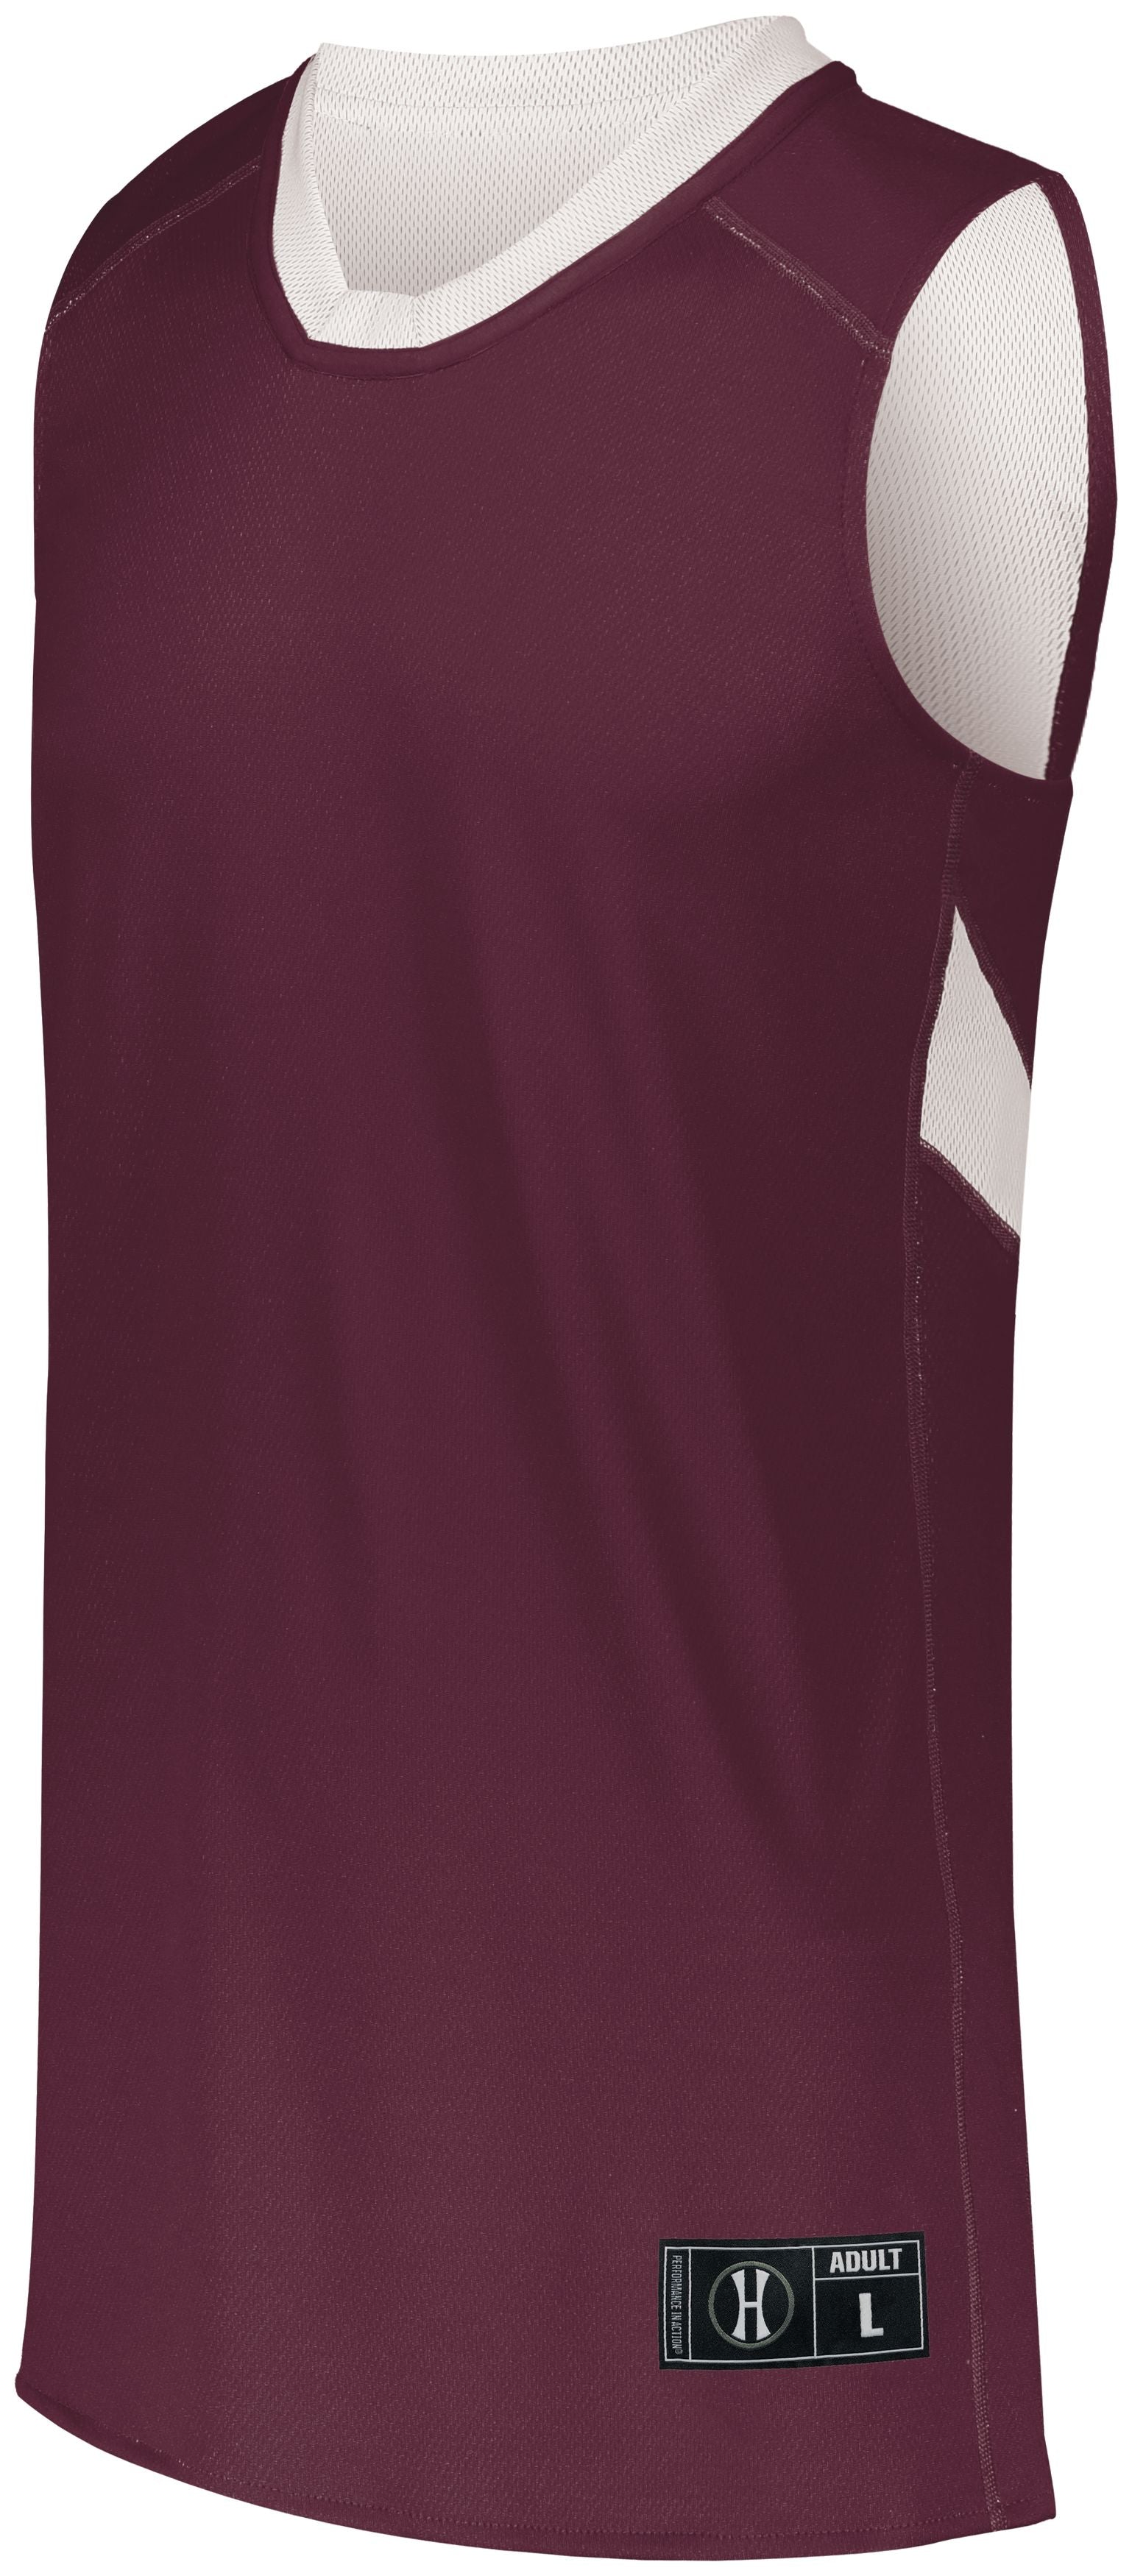 Holloway Dual-Side Single Ply Basketball Jersey in Maroon/White  -Part of the Adult, Adult-Jersey, Basketball, Holloway, Shirts, All-Sports, All-Sports-1 product lines at KanaleyCreations.com